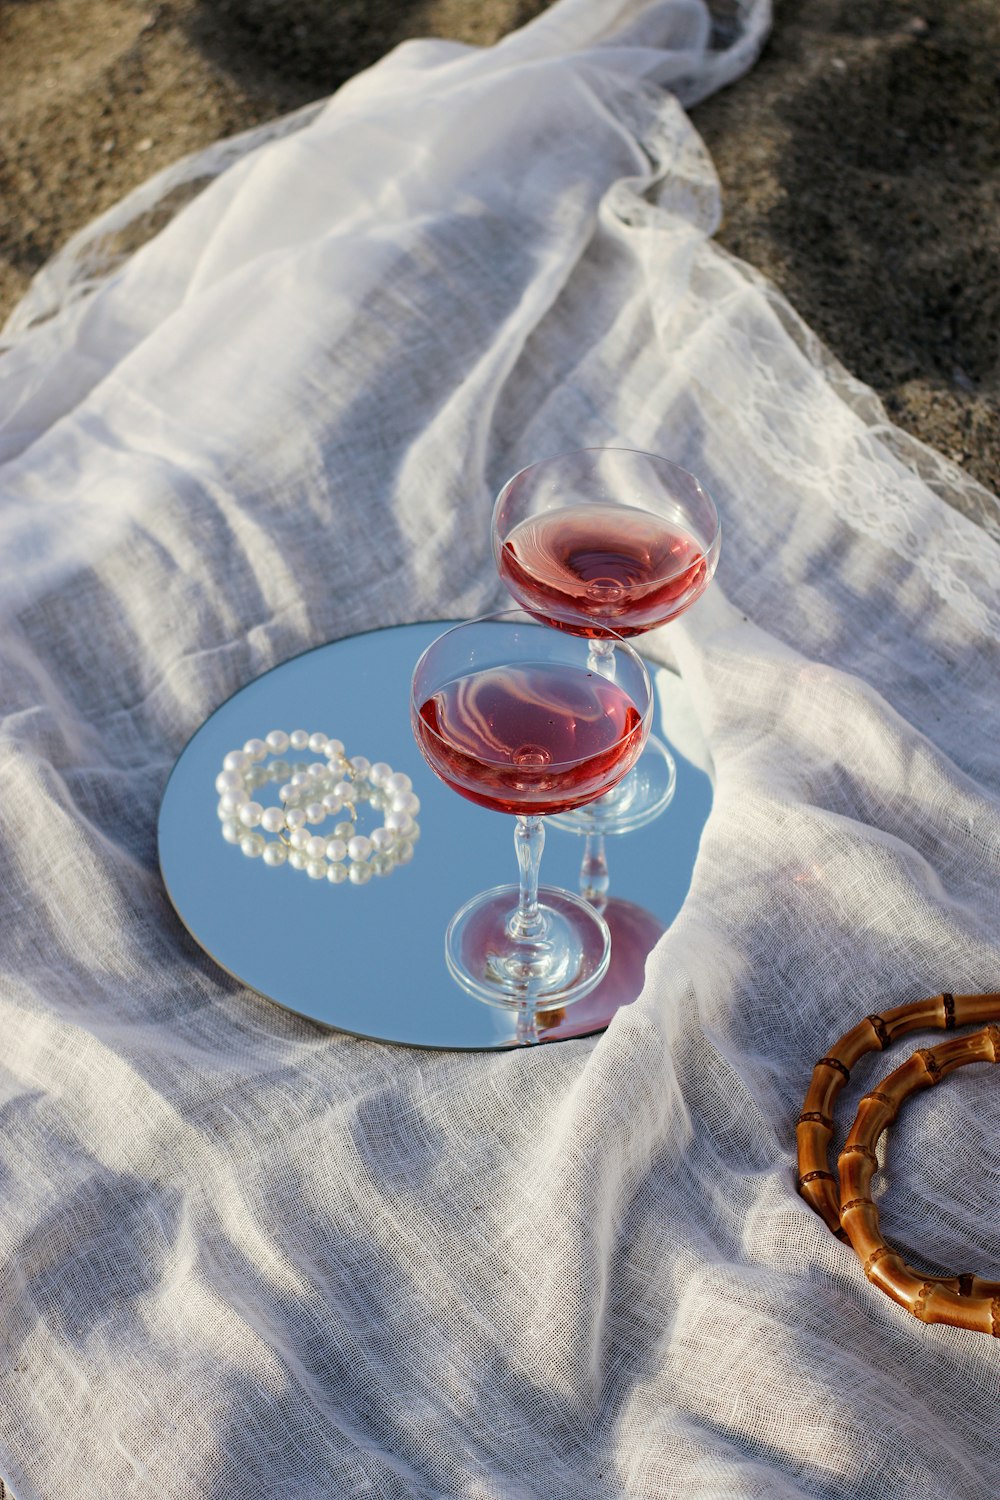 clear wine glass on blue and white round ceramic plate